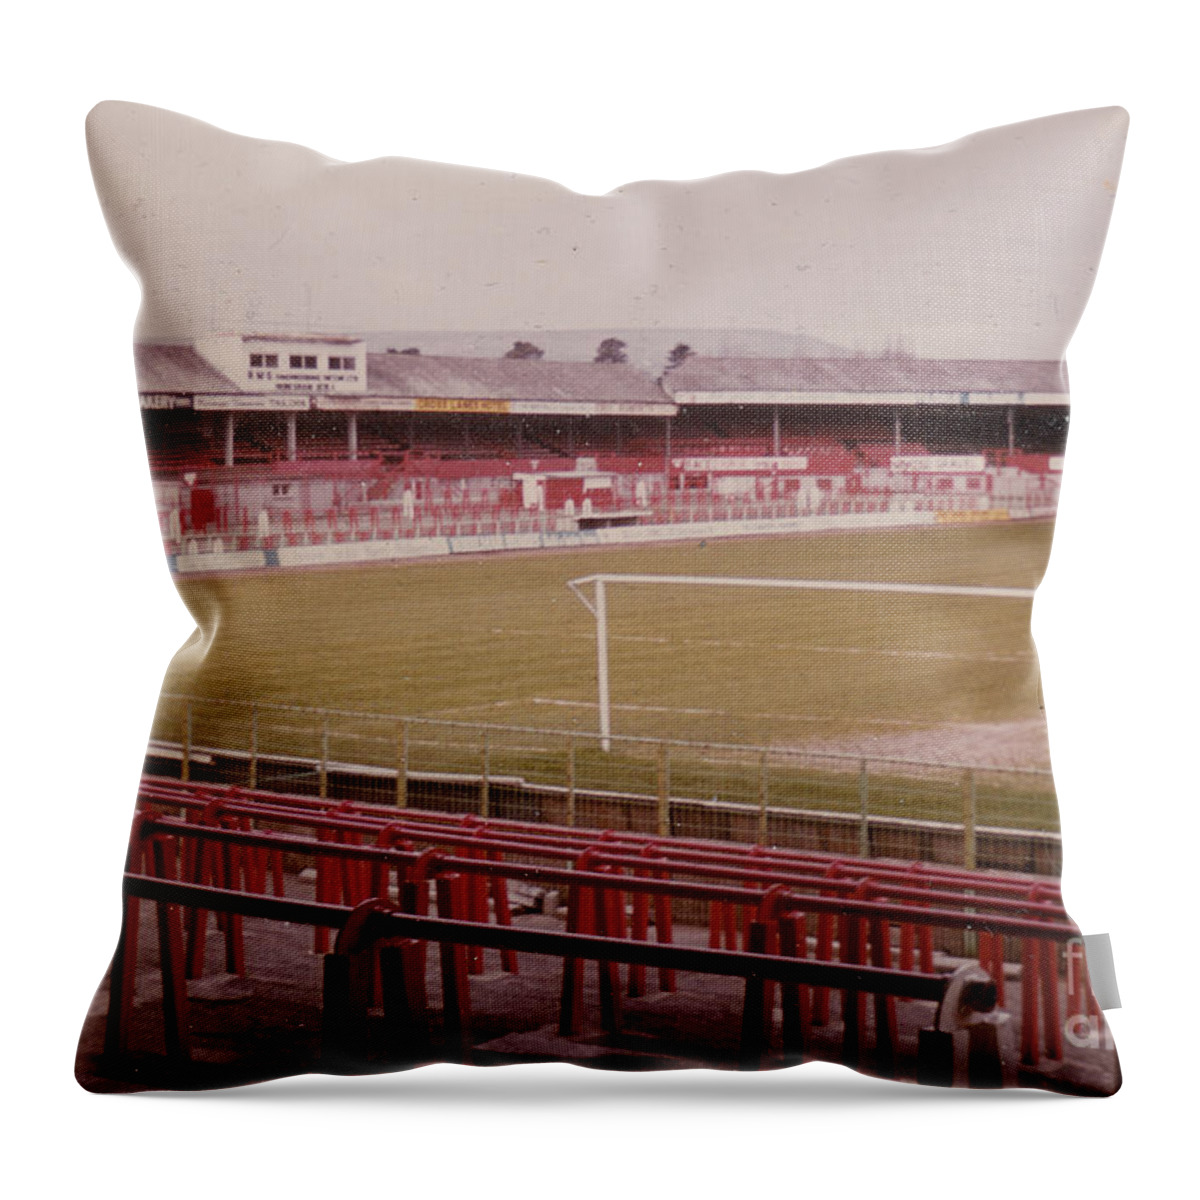  Throw Pillow featuring the photograph Wrexham FC - Racecourse Ground - Mold Road Stand 1 - 1980s by Legendary Football Grounds